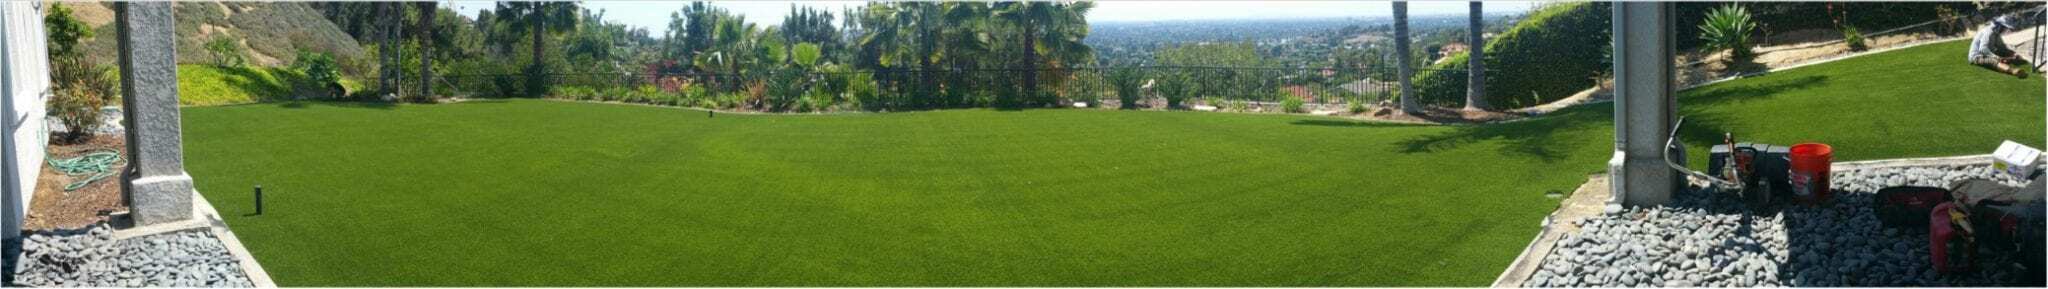 Turf Products, Artificial Grass for Landscapes, Orange County Pavers